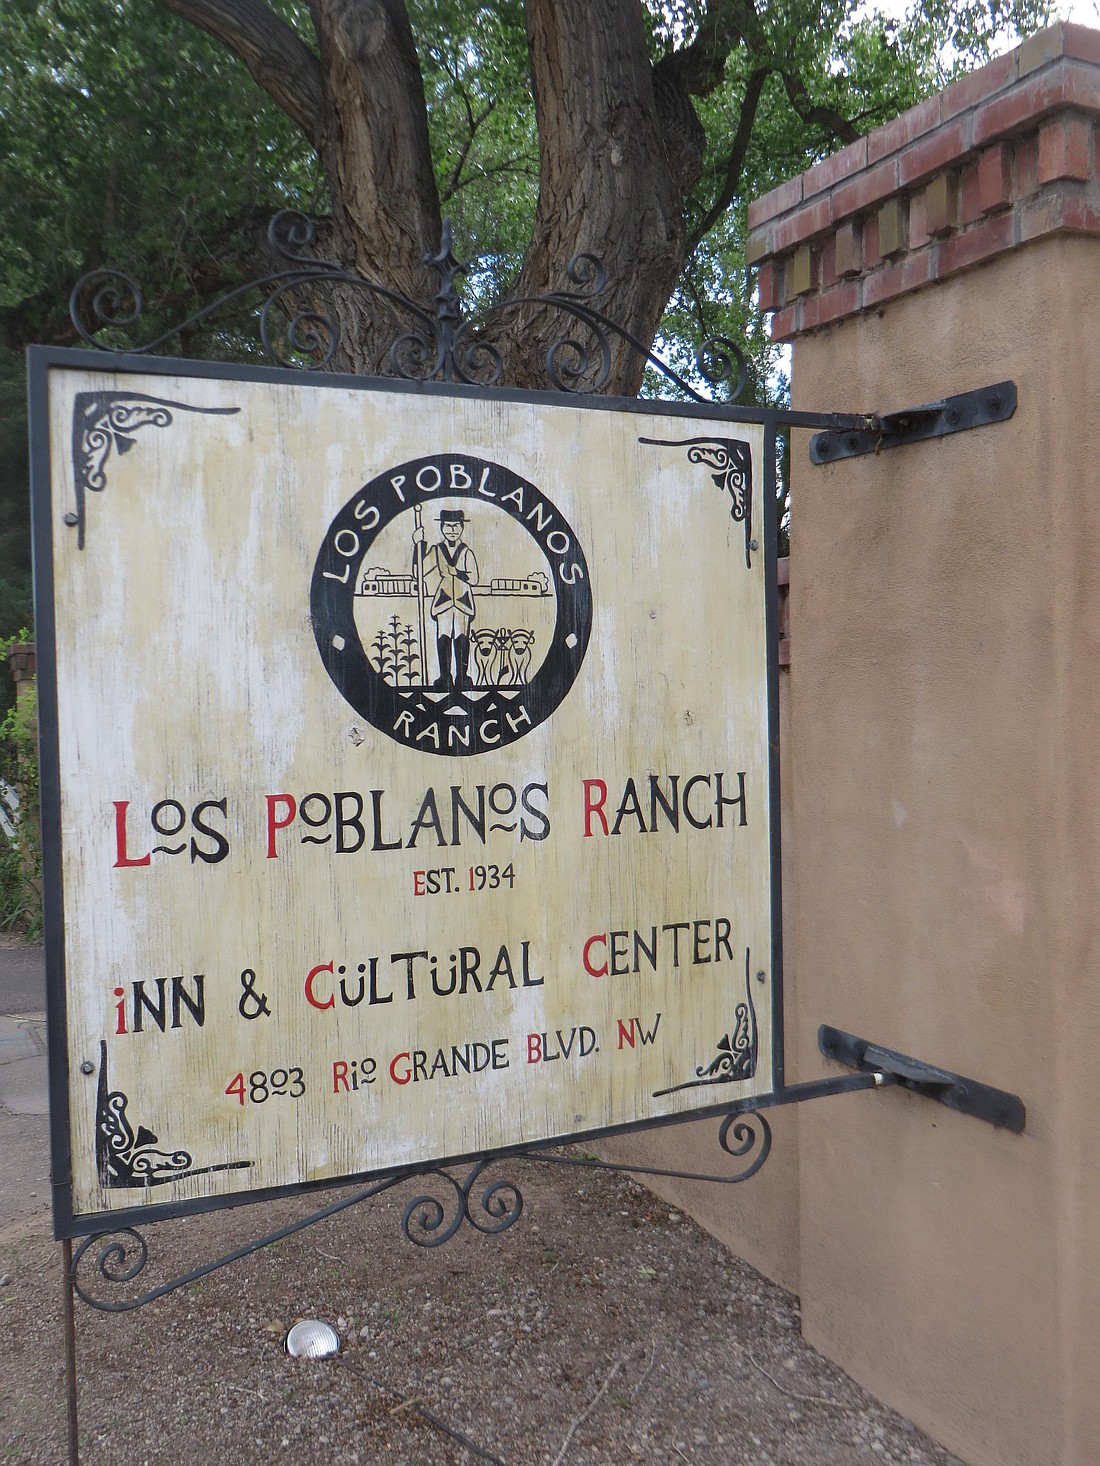 Los Poblamos is a little slice of paradise in the middle of Albuquerque, New Mexico.
Photo by Deborah Stone